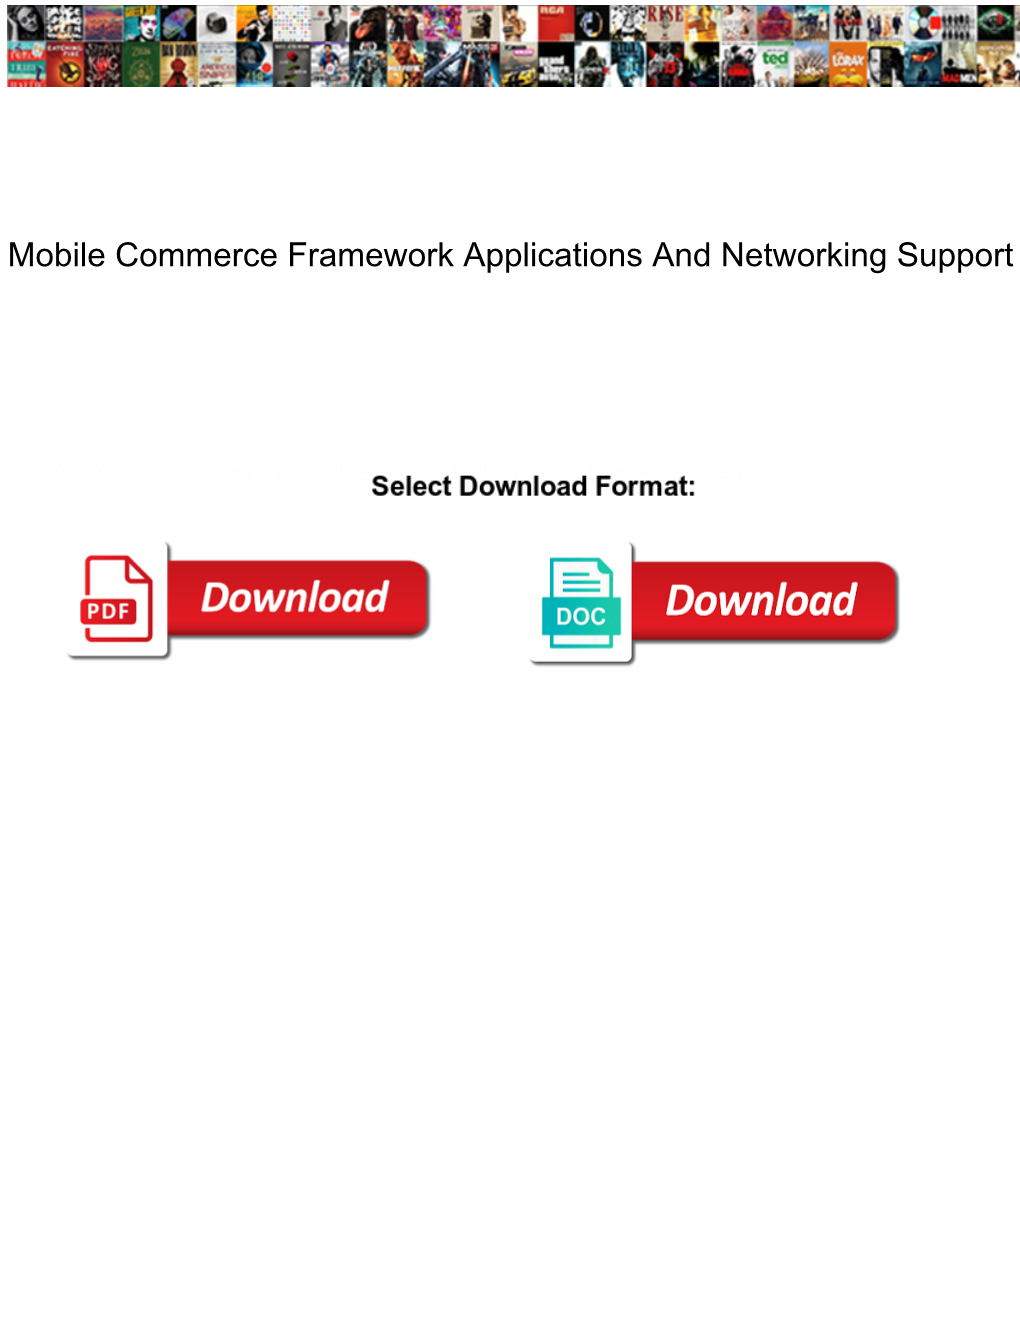 Mobile Commerce Framework Applications and Networking Support